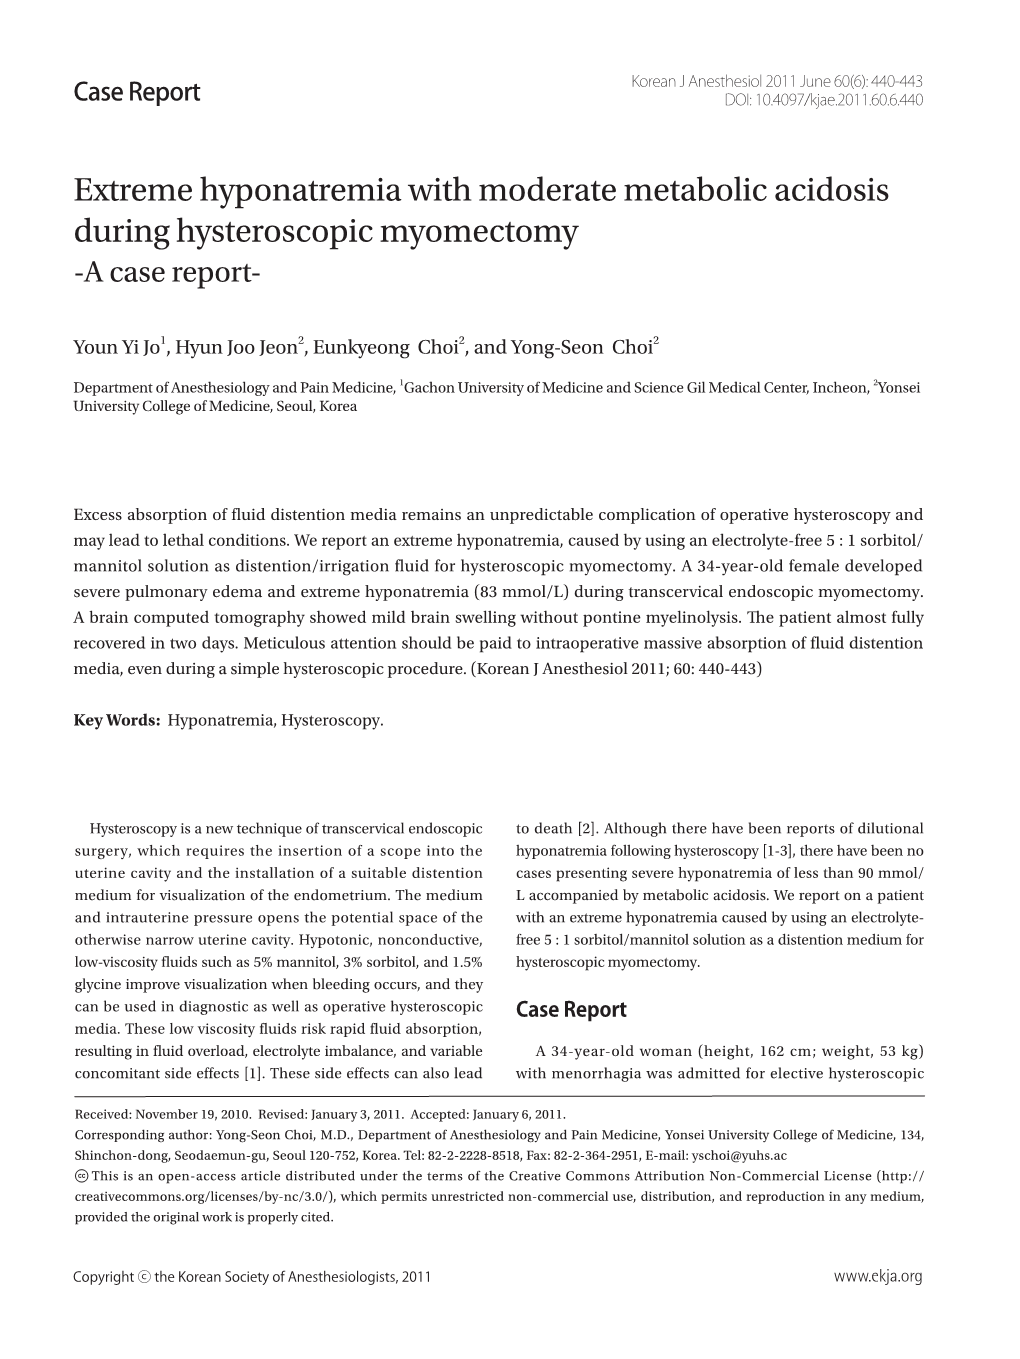 Extreme Hyponatremia with Moderate Metabolic Acidosis During Hysteroscopic Myomectomy -A Case Report